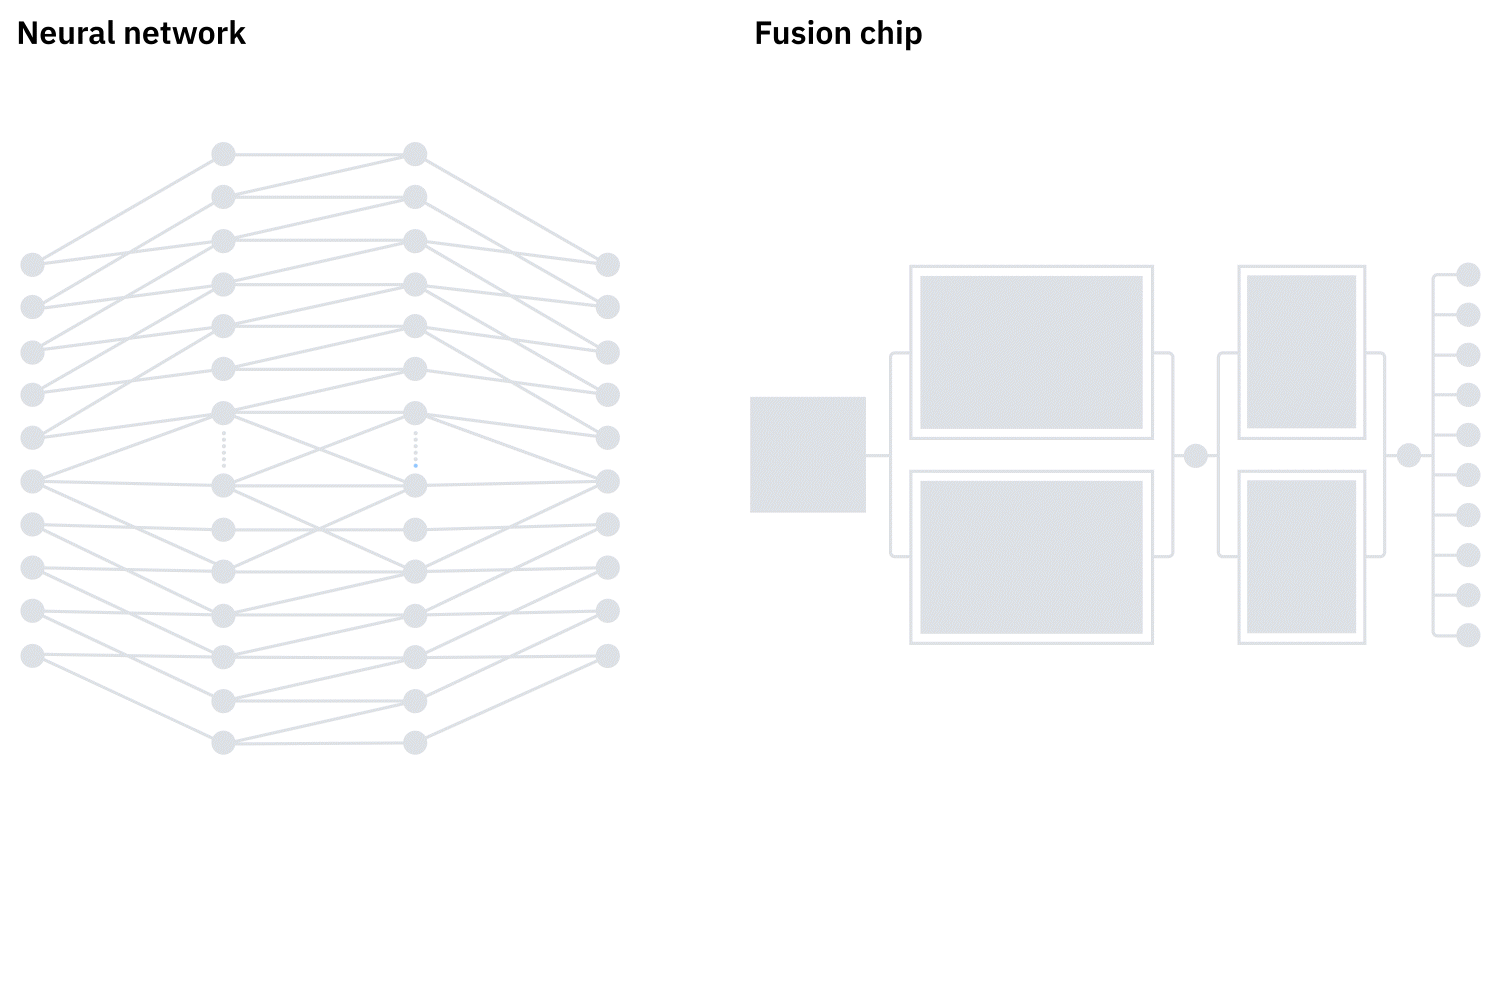 Illustration of a comparison between a an analog ai chip and a neural network